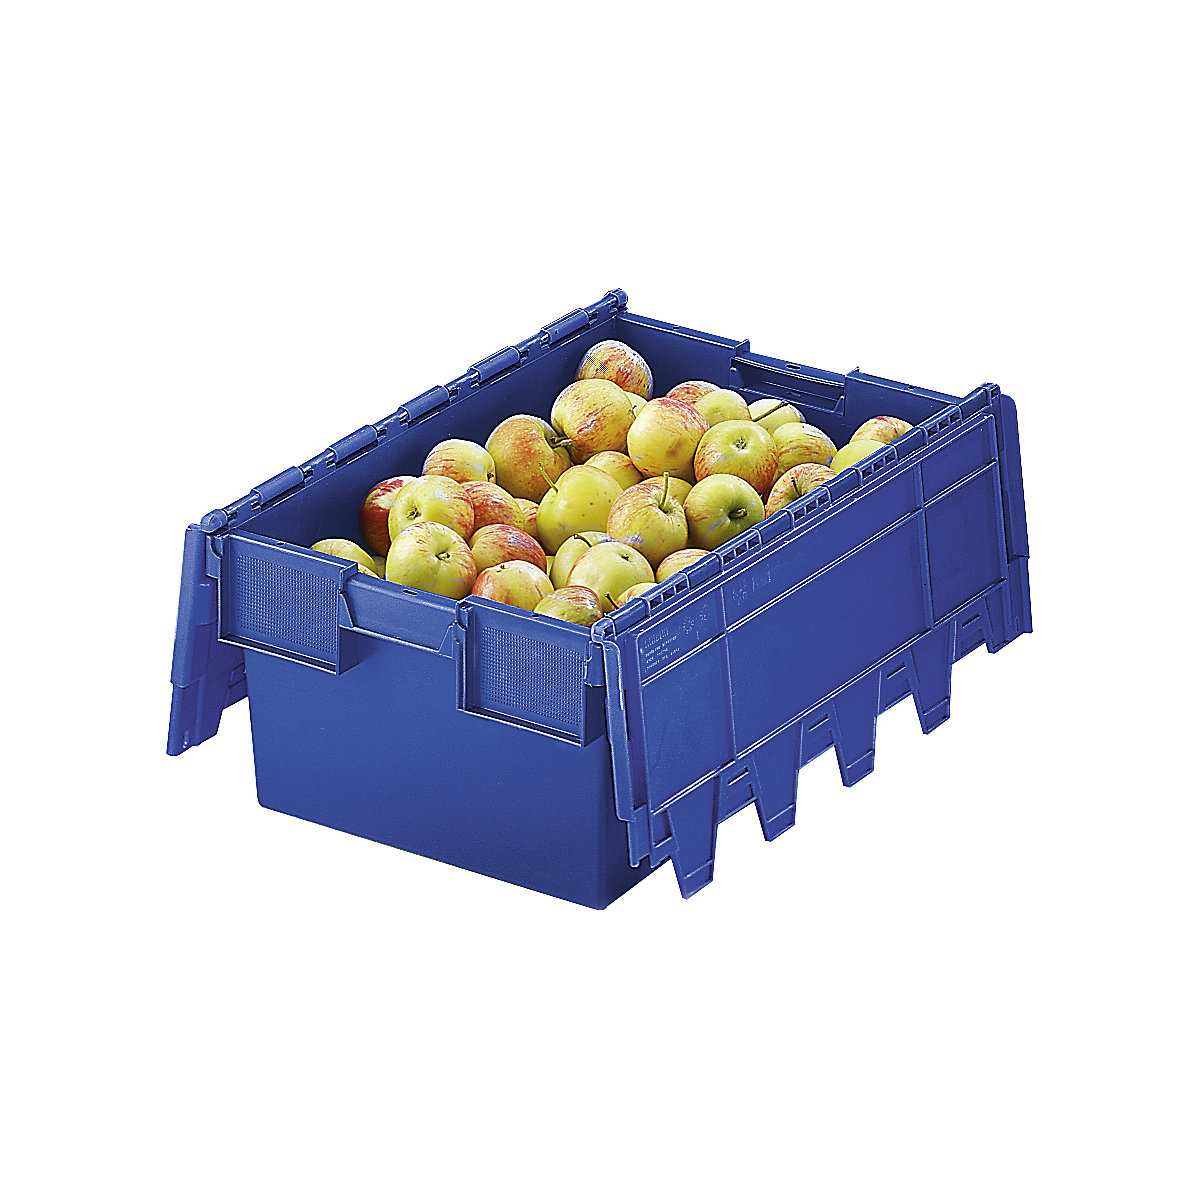 KAIMAN reusable stacking container, capacity 40 l, LxWxH 600 x 400 x 250 mm, blue, 10+ items-4